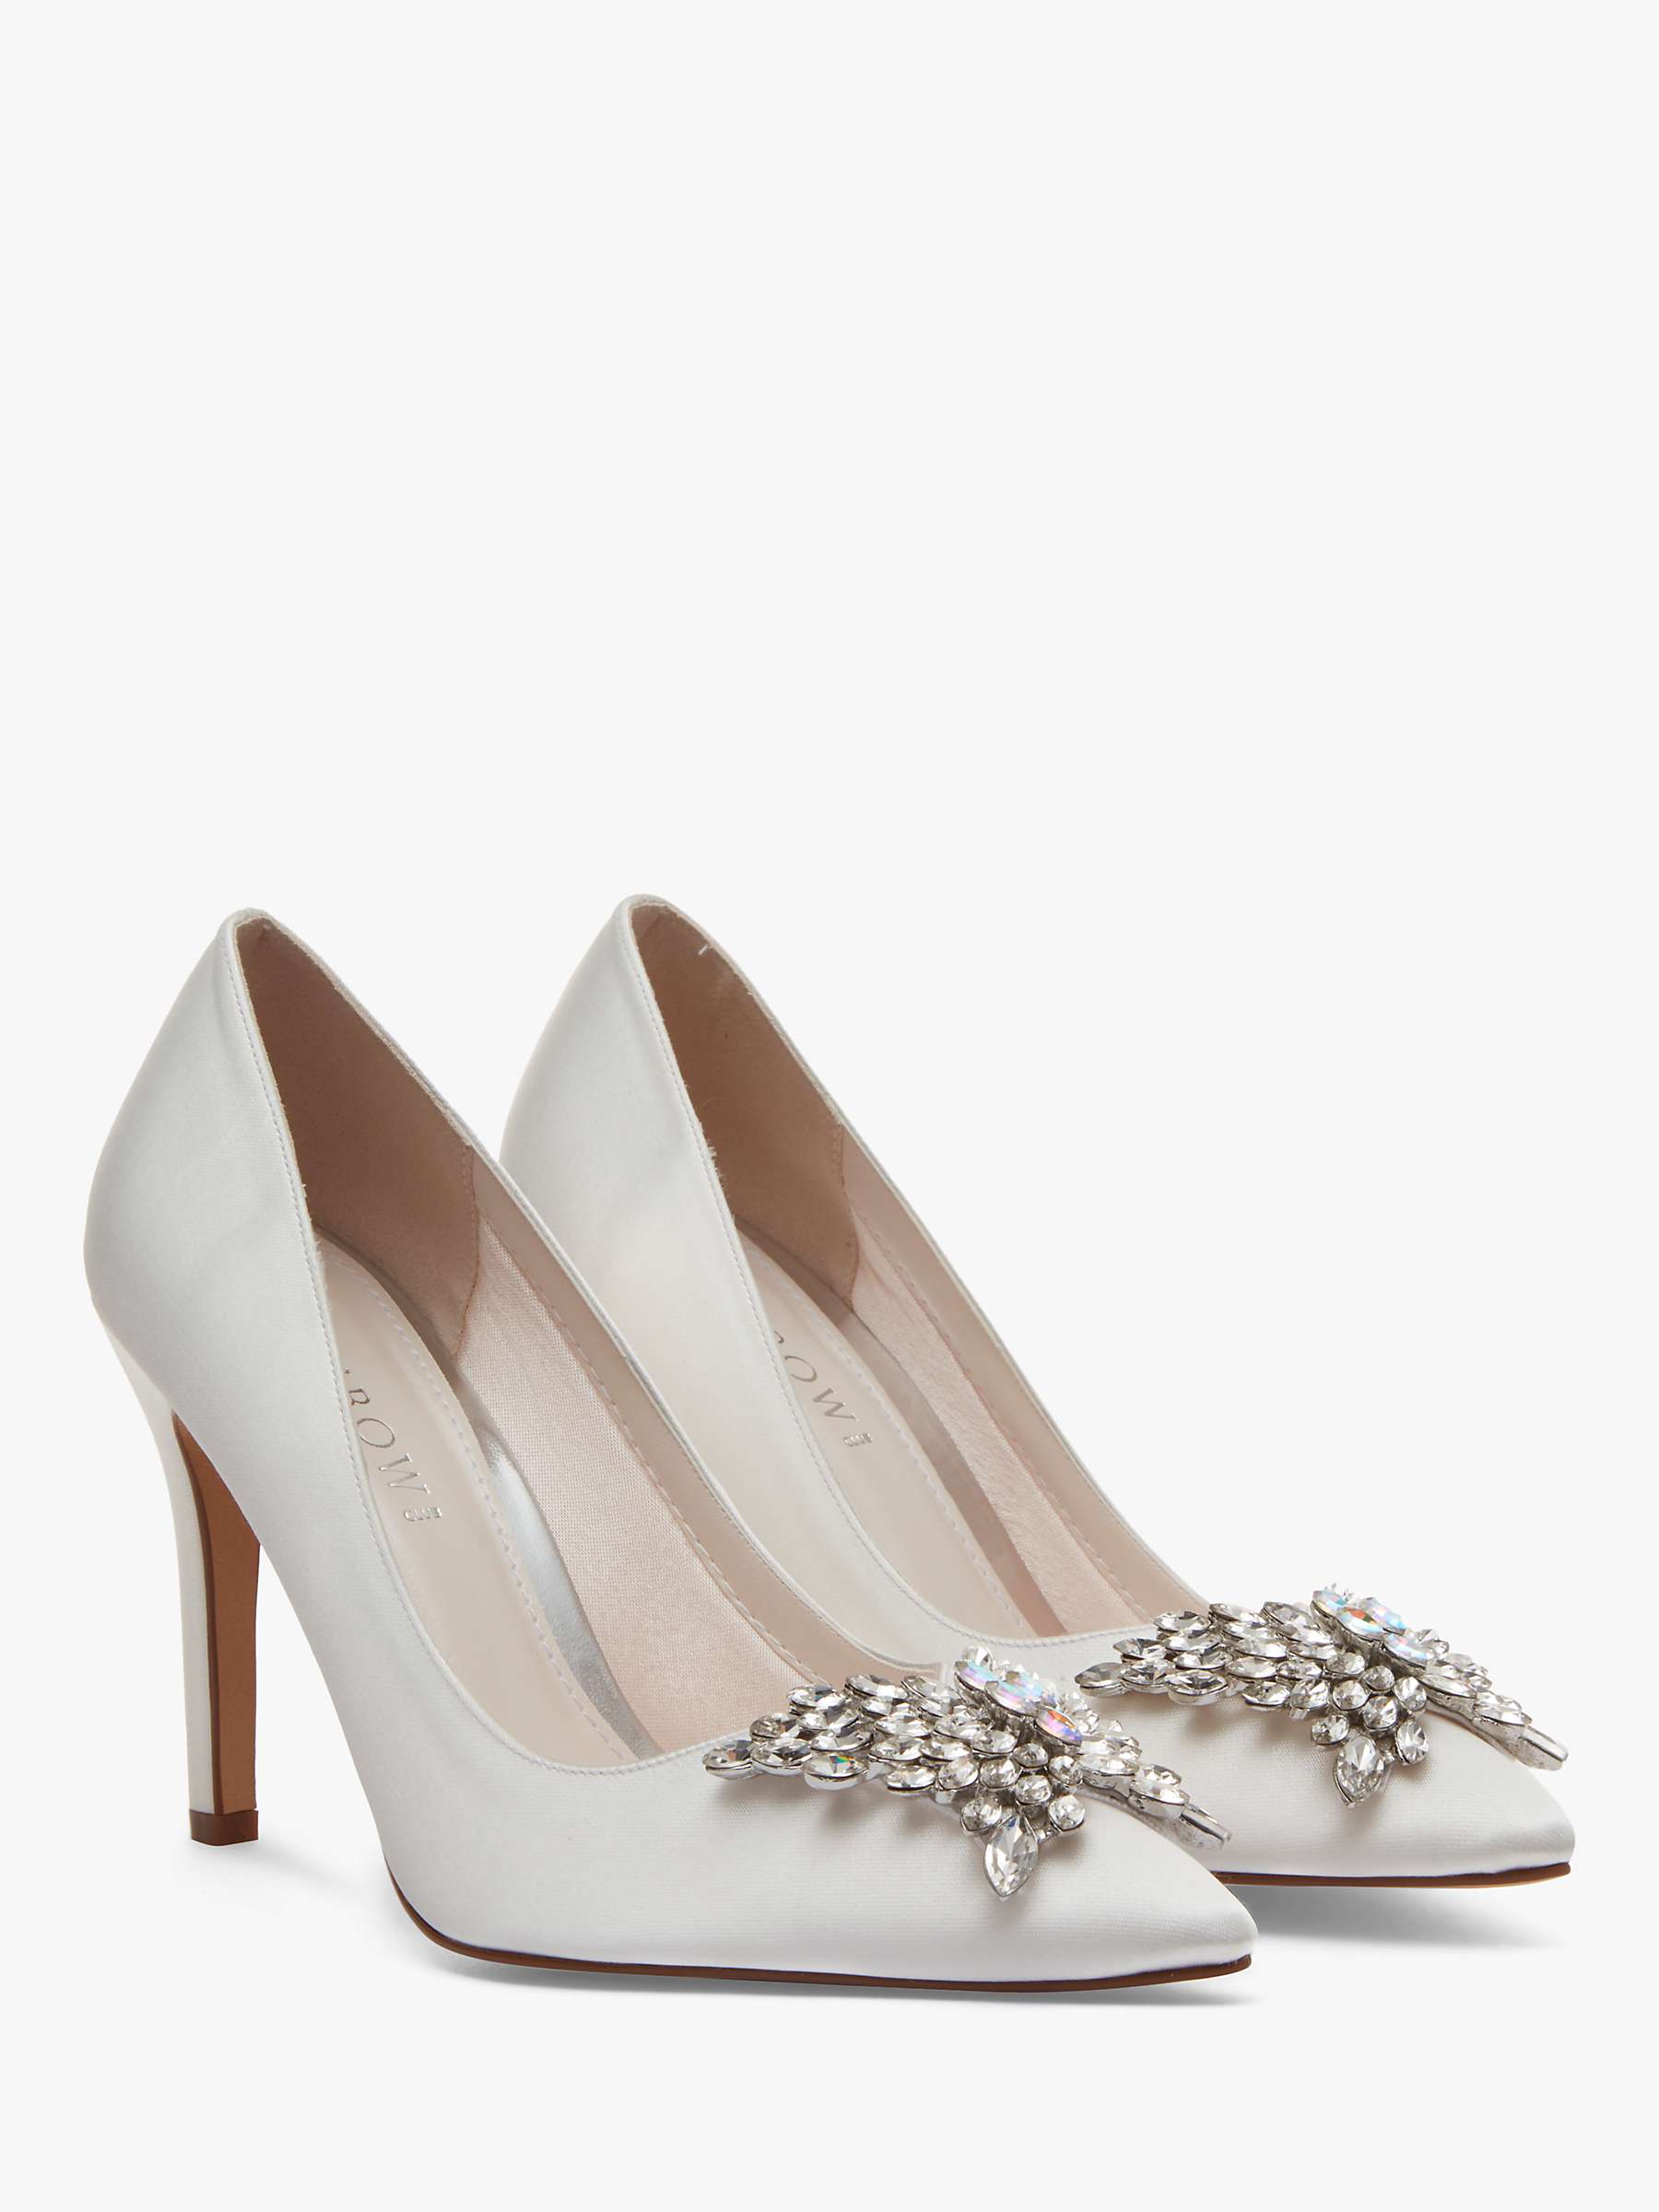 Buy Rainbow Club Nelly Satin Jewel Court Shoes, Ivory Online at johnlewis.com